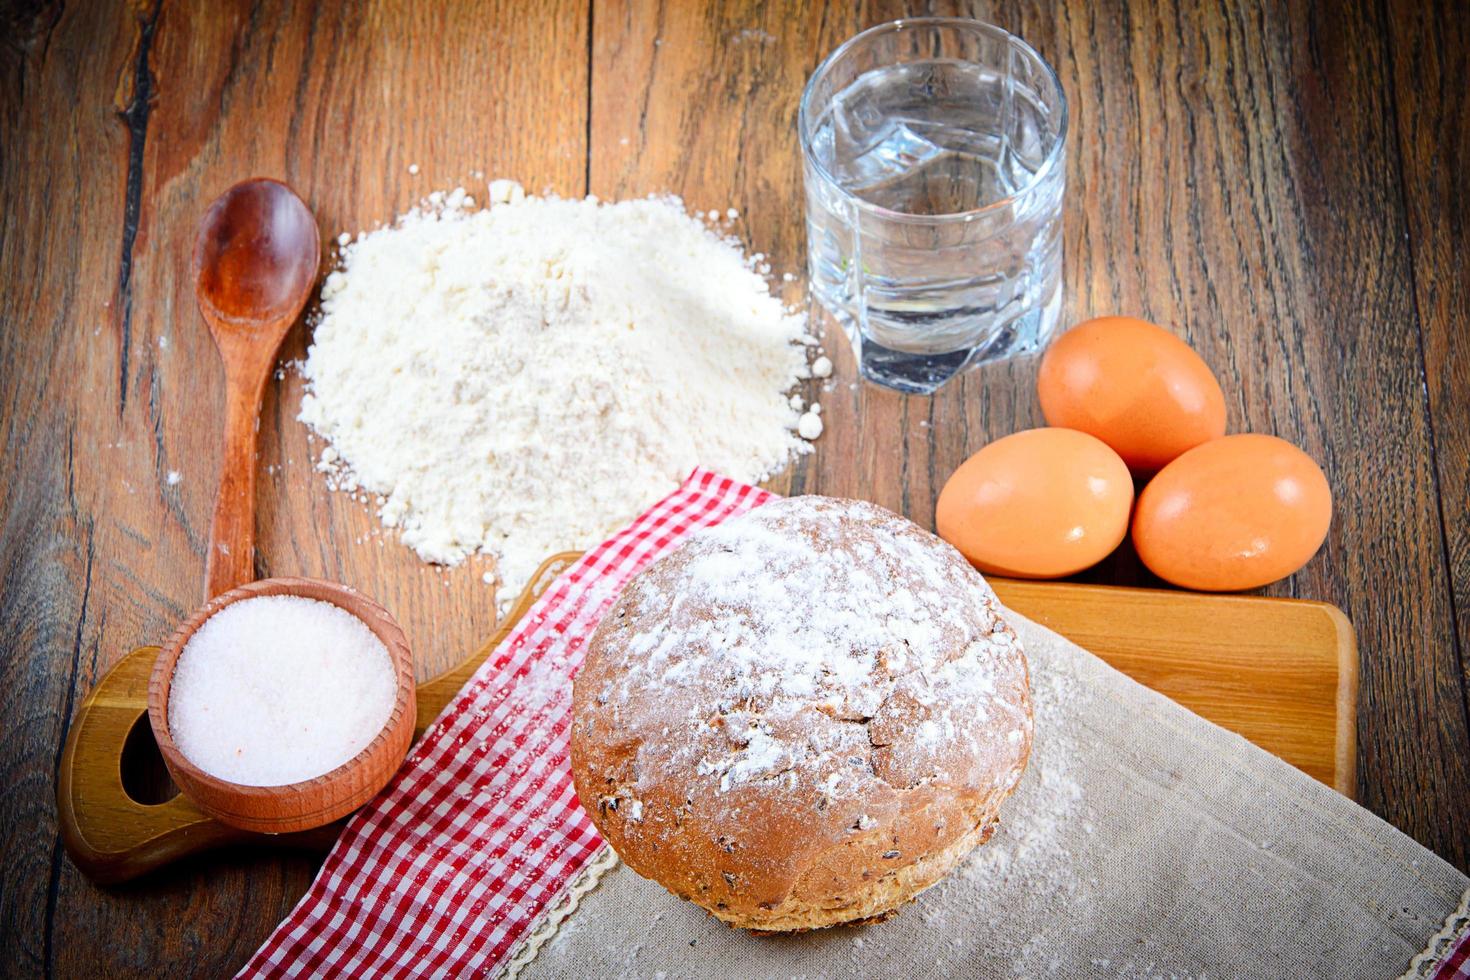 Bread, Flour, Egg and Water. Baking photo